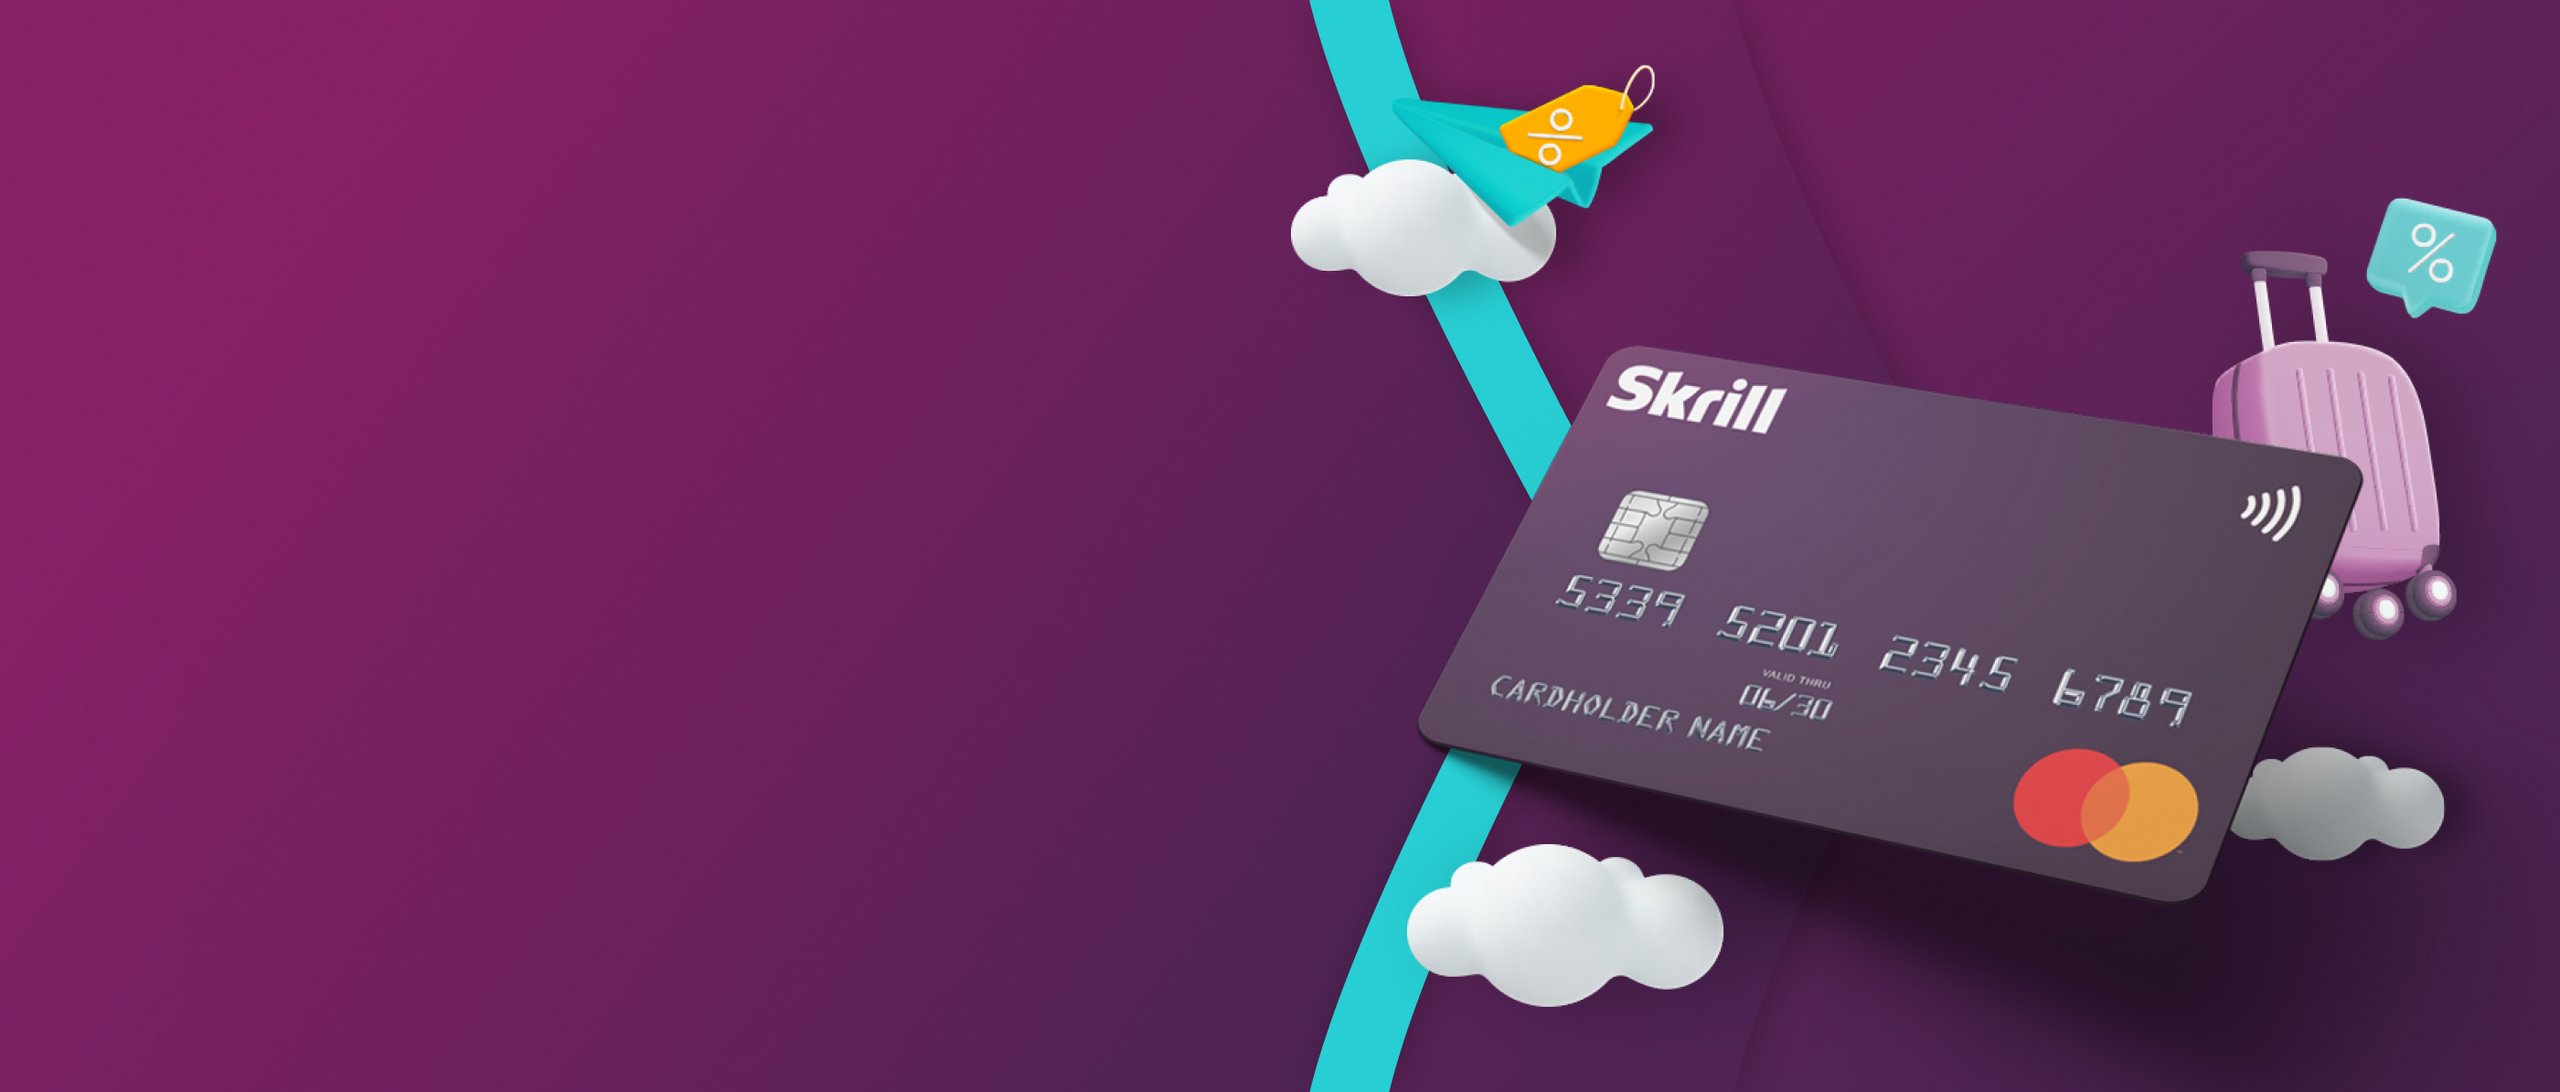 Skrill Prepaid Mastercard with clouds and suitcase icons